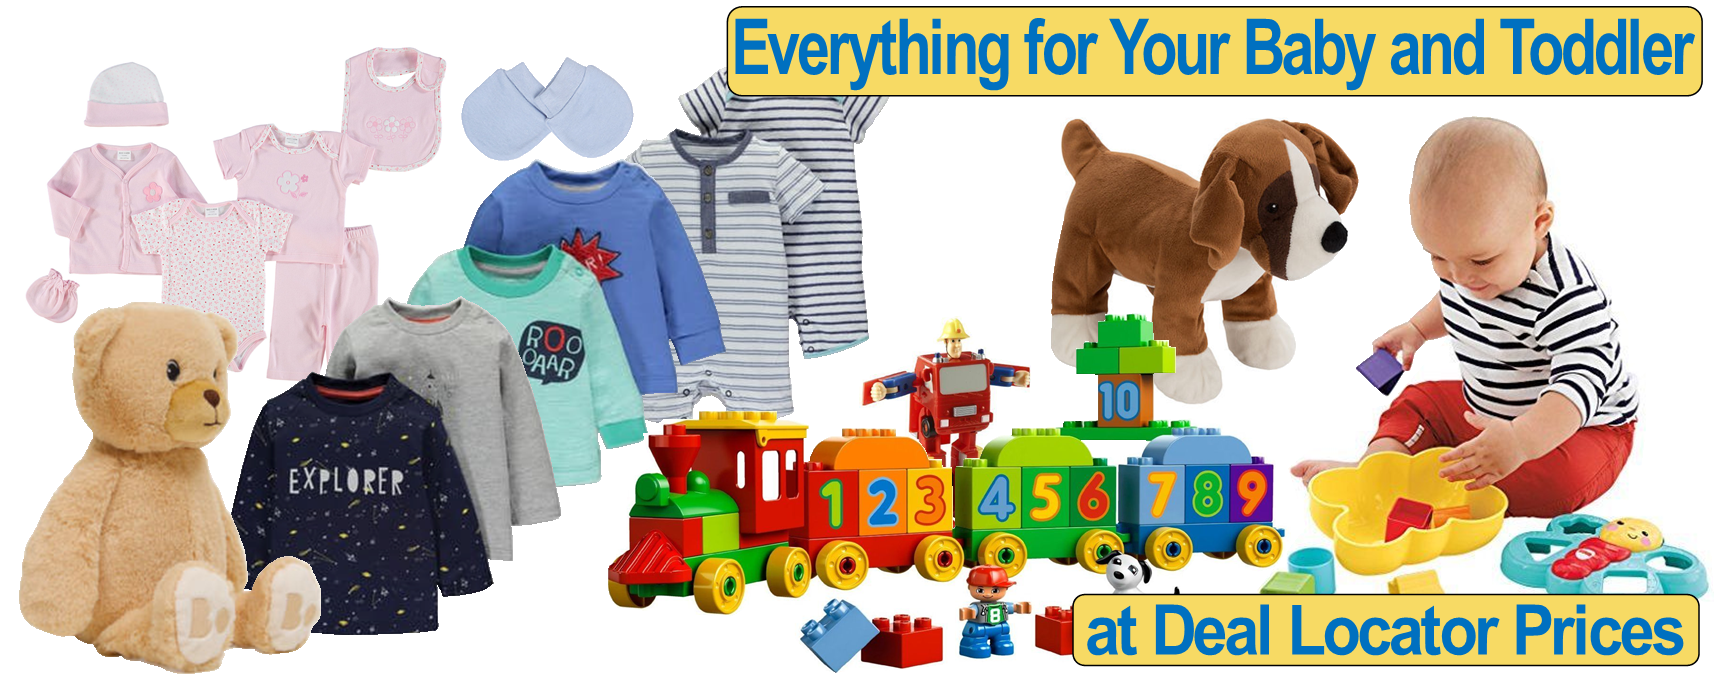 Shopping Deals on Baby and Toddler Products